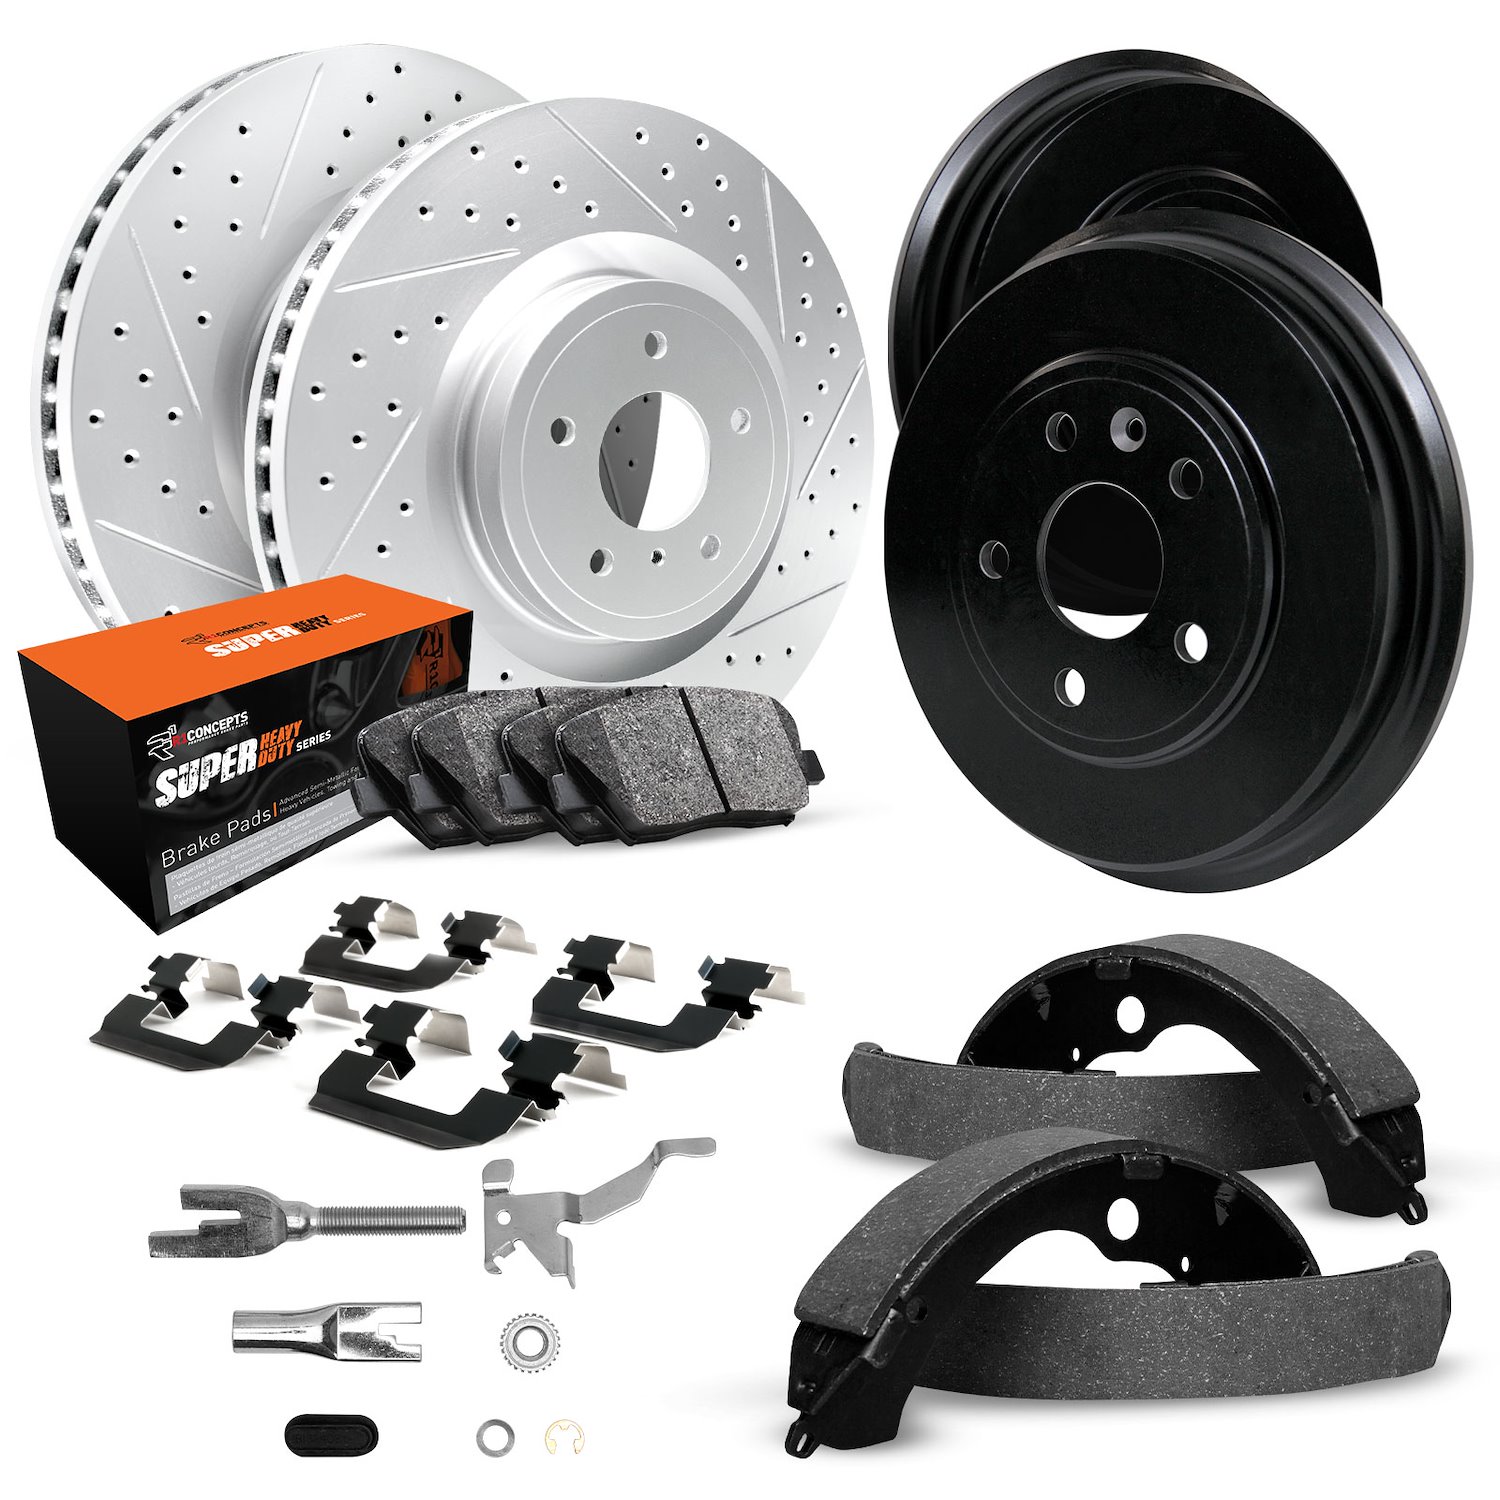 GEO-Carbon Drilled/Slotted Rotors/Drums w/Super-Duty Pads/Shoes/Hardware/Adjusters, 1999-1999 Mopar, Position: Front/Rear